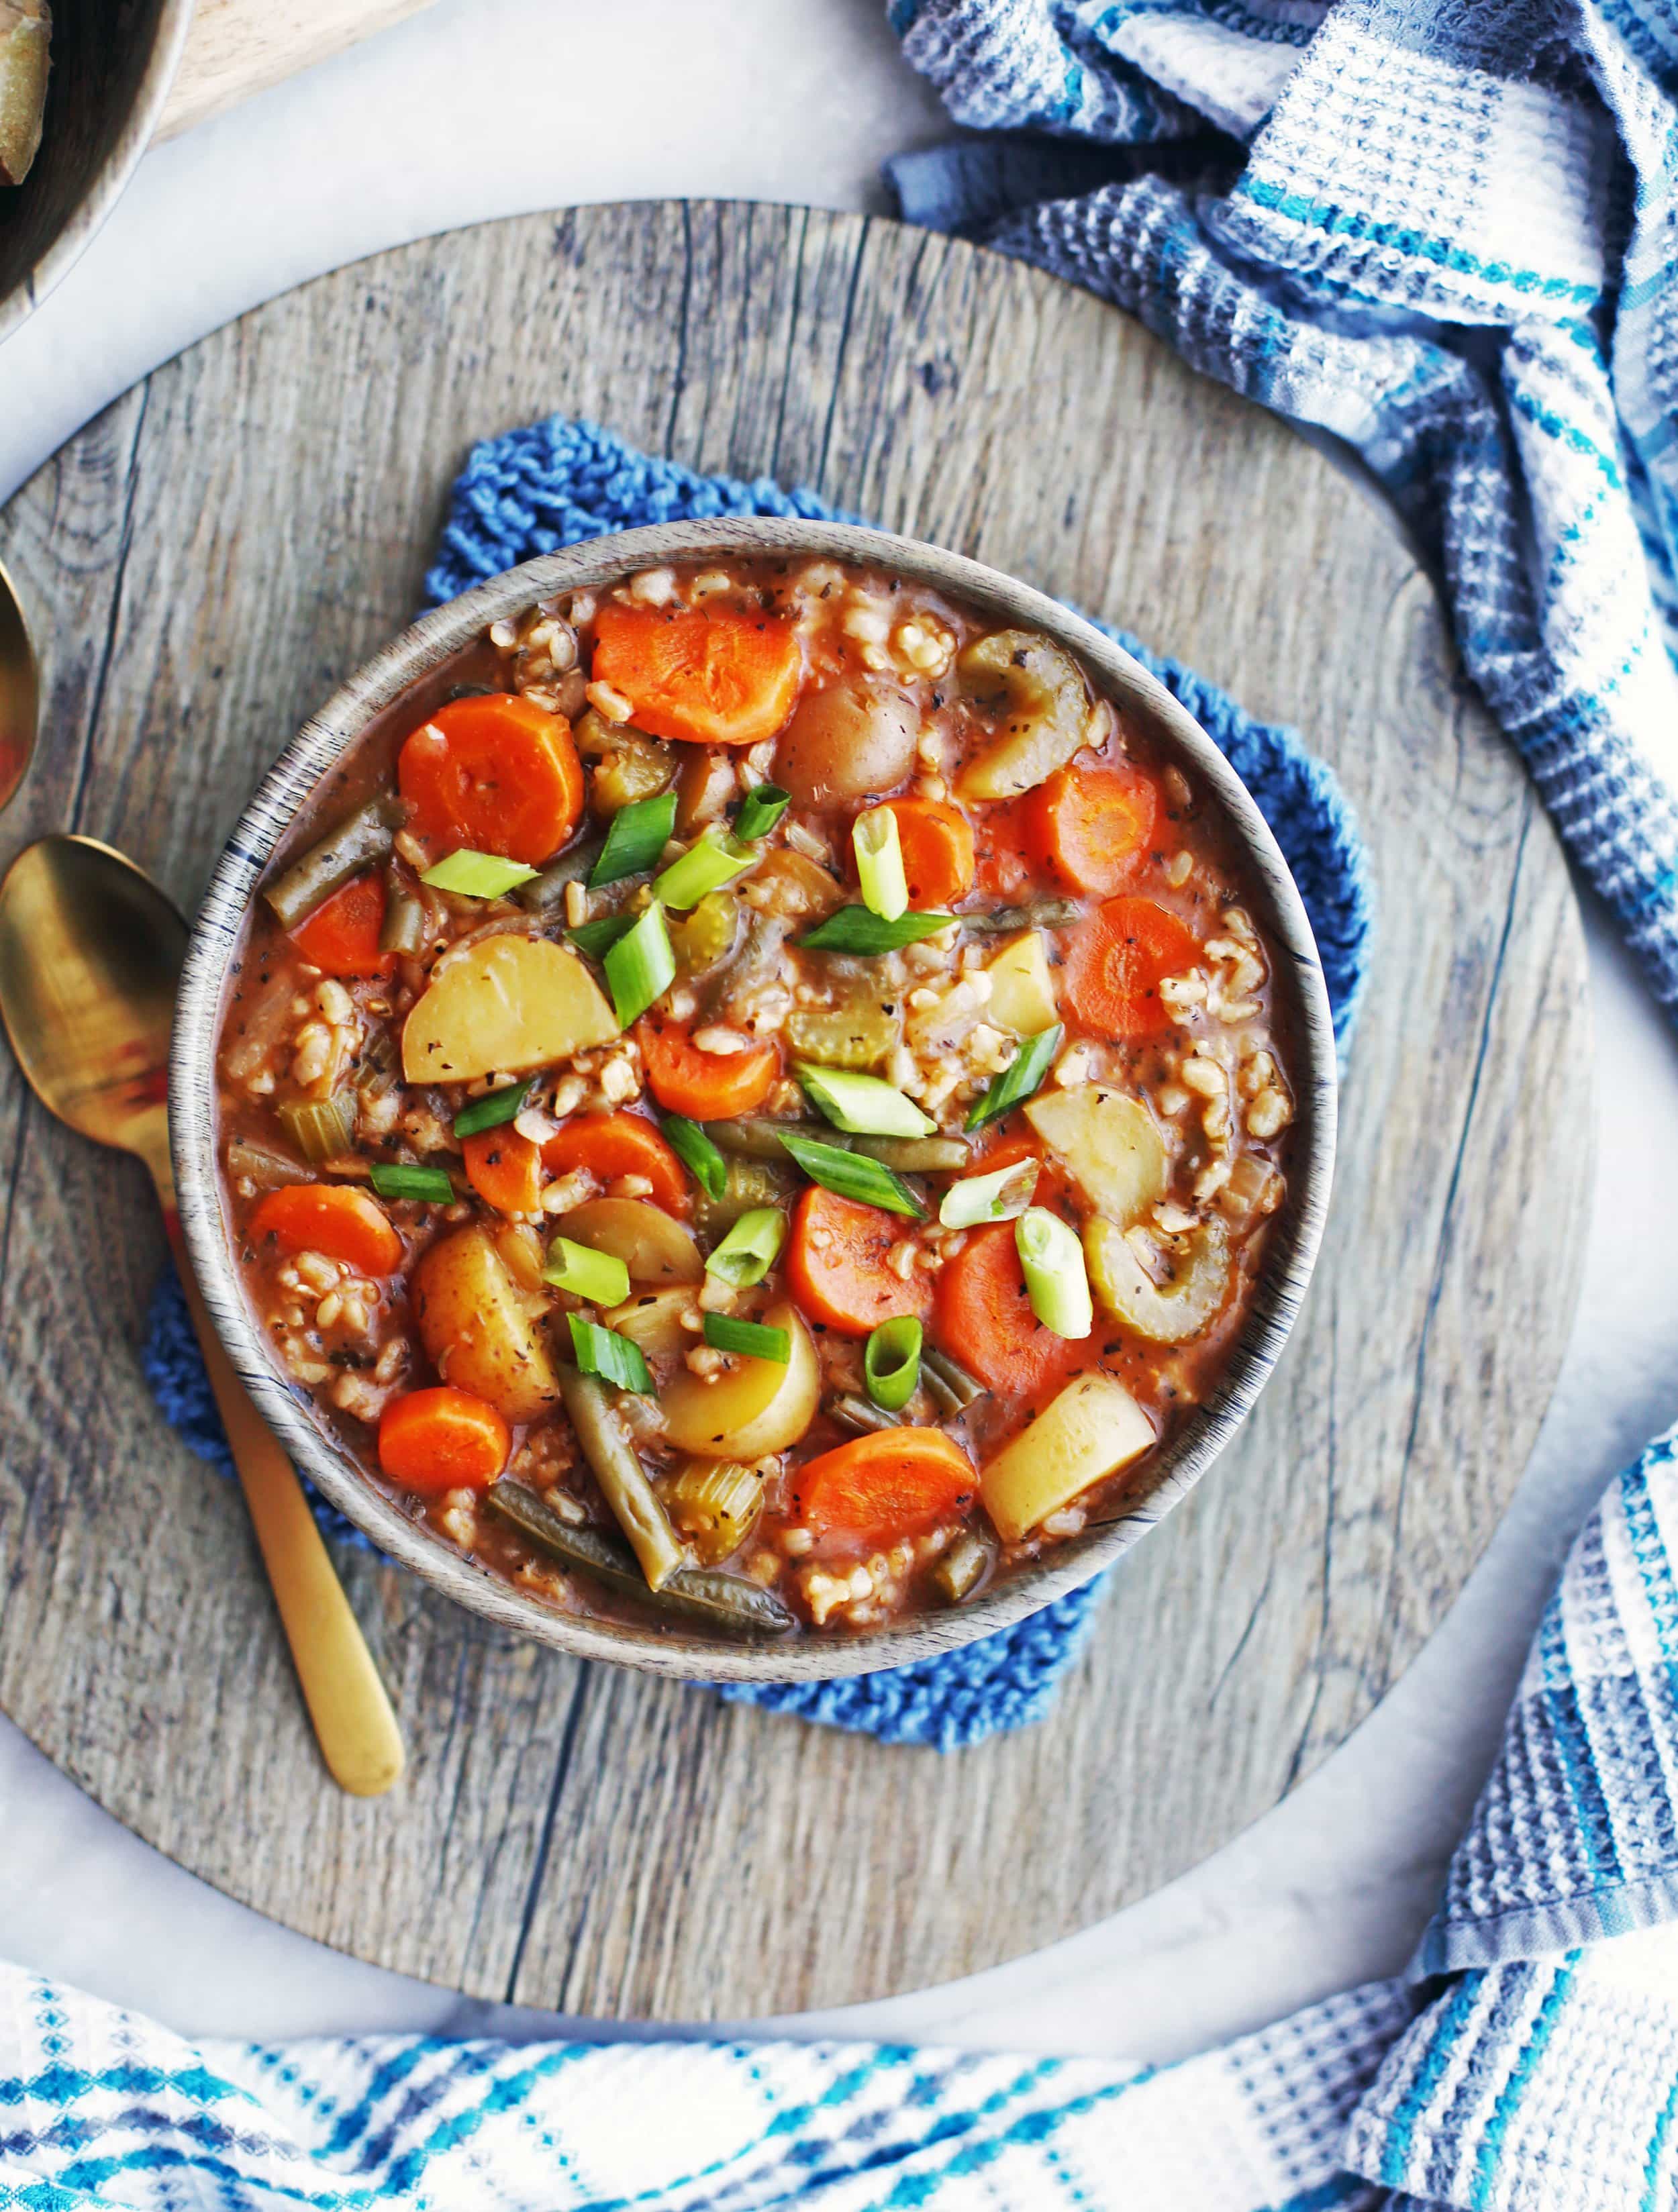 Instant Pot Hearty Vegetable and Brown Rice Soup - Yay! For Food